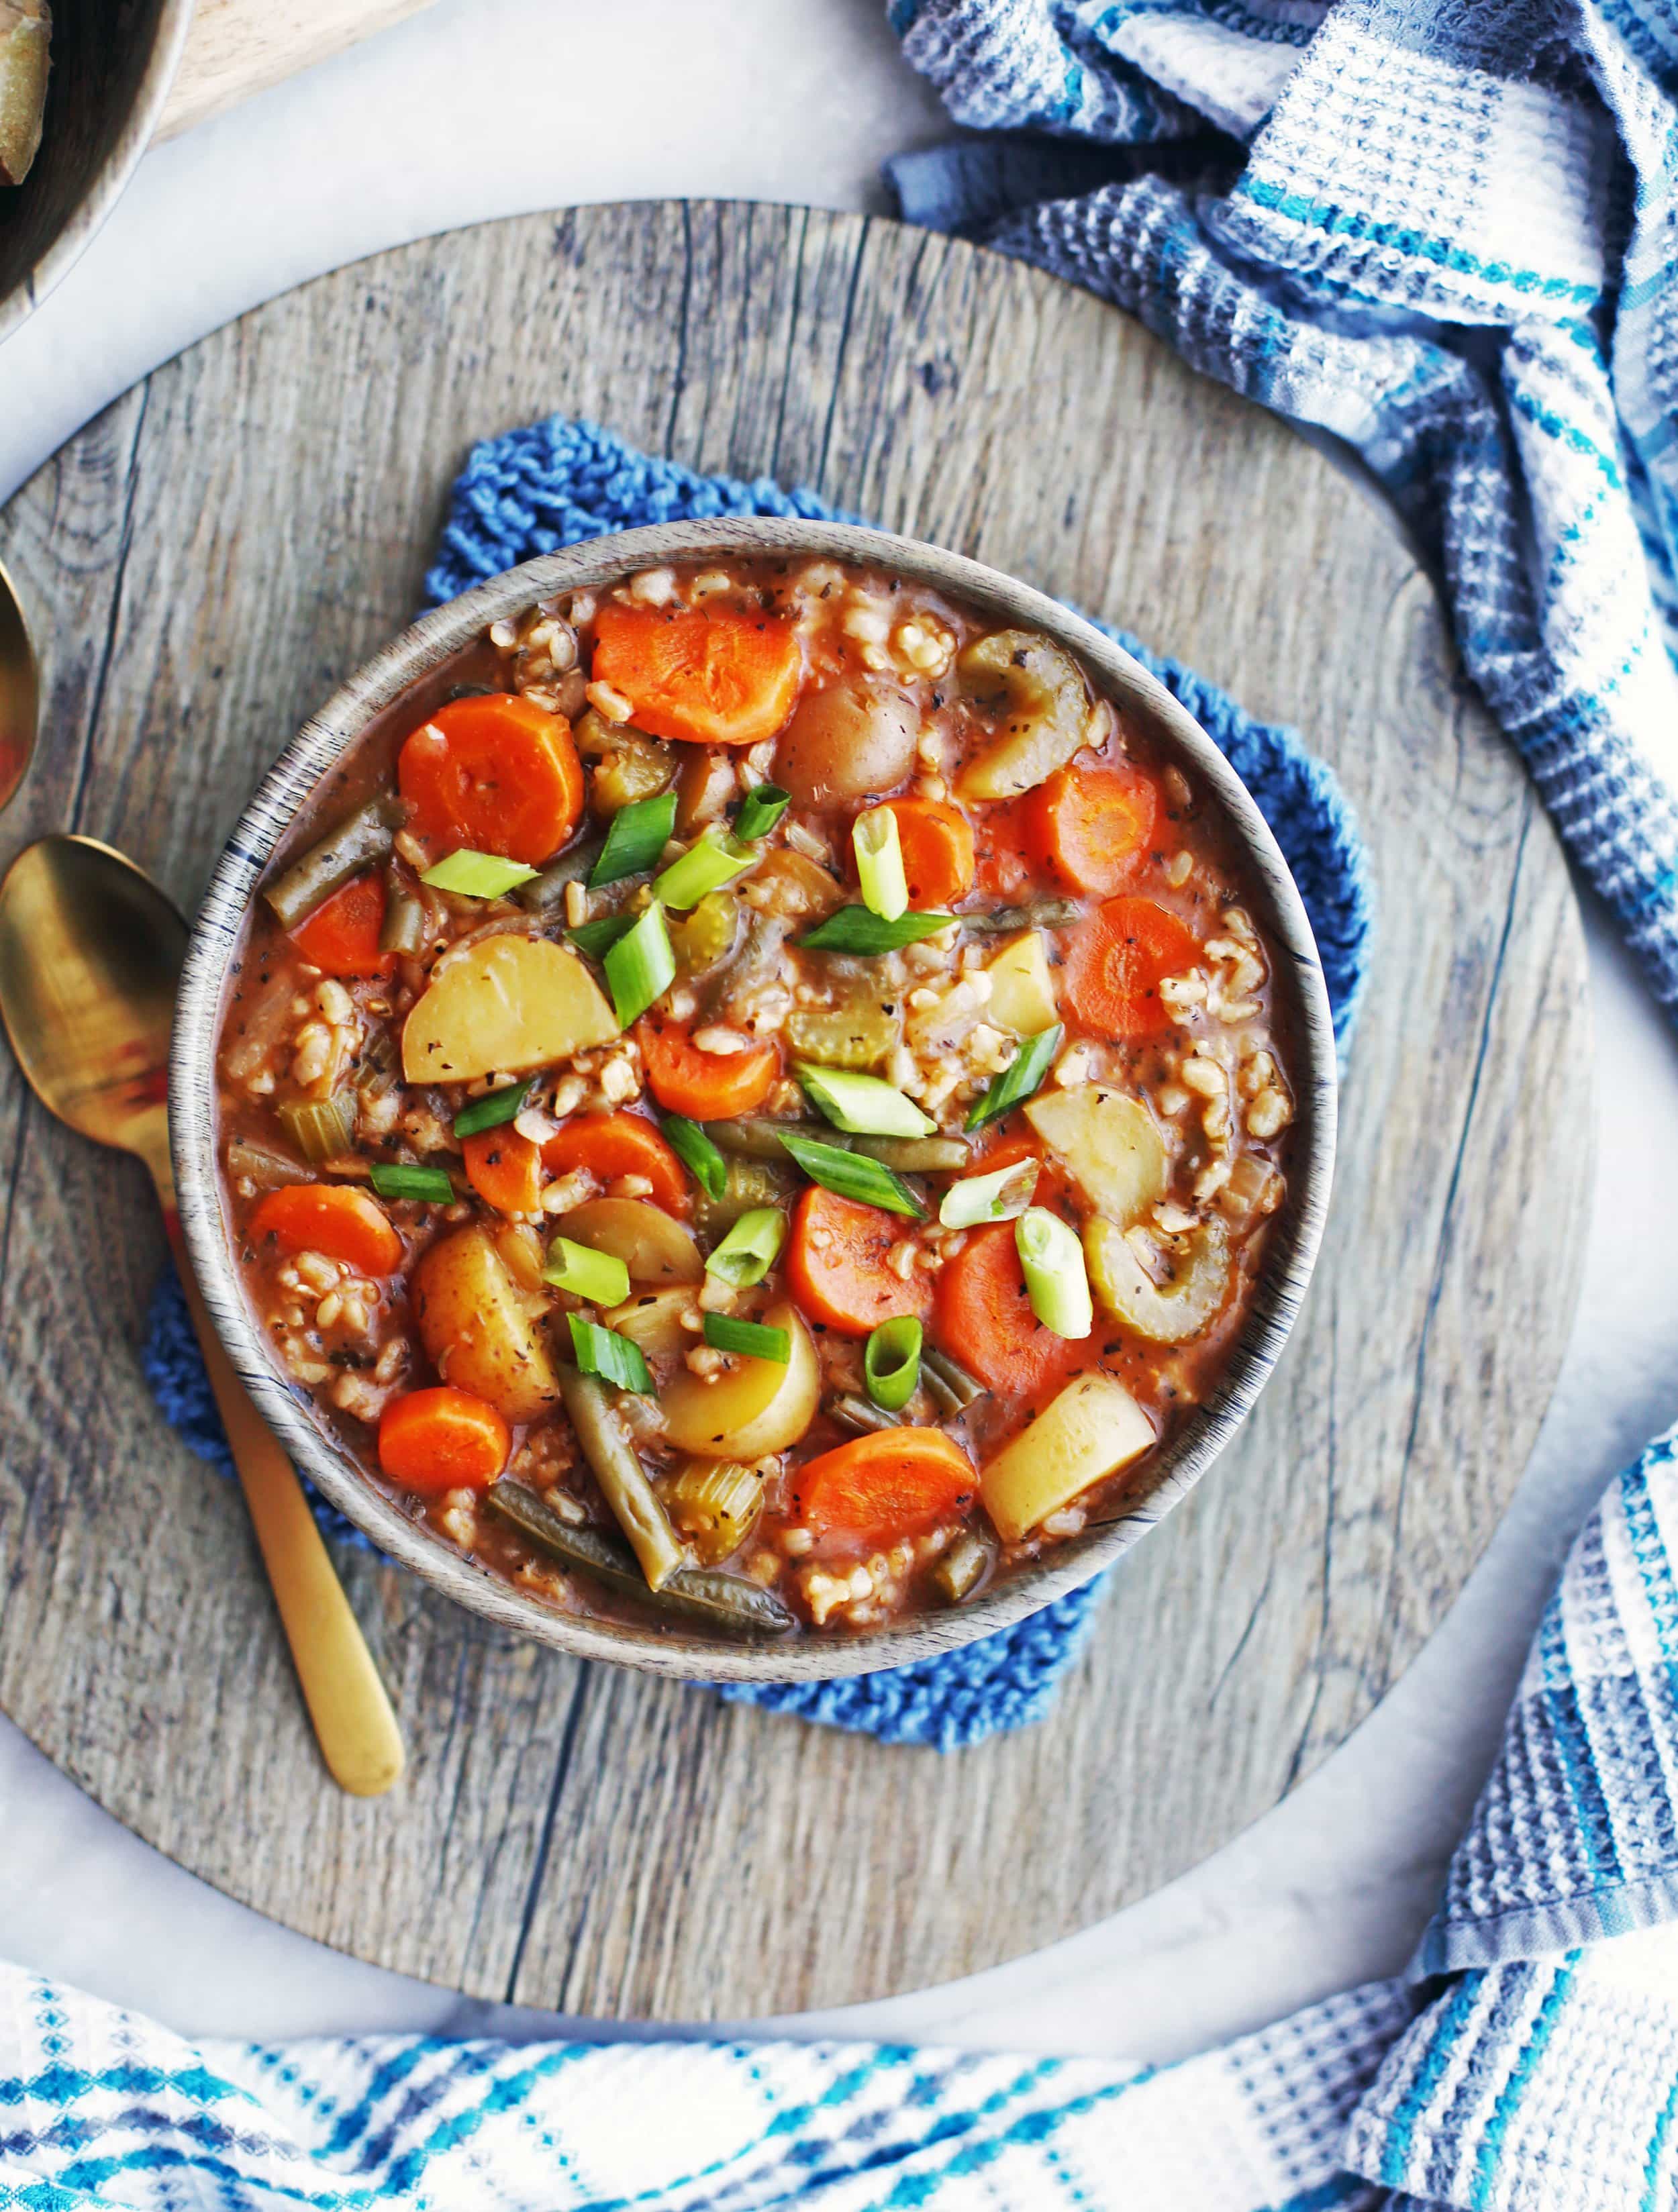 Instant Pot Hearty Vegetable and Brown Rice Soup - Yay! For Food